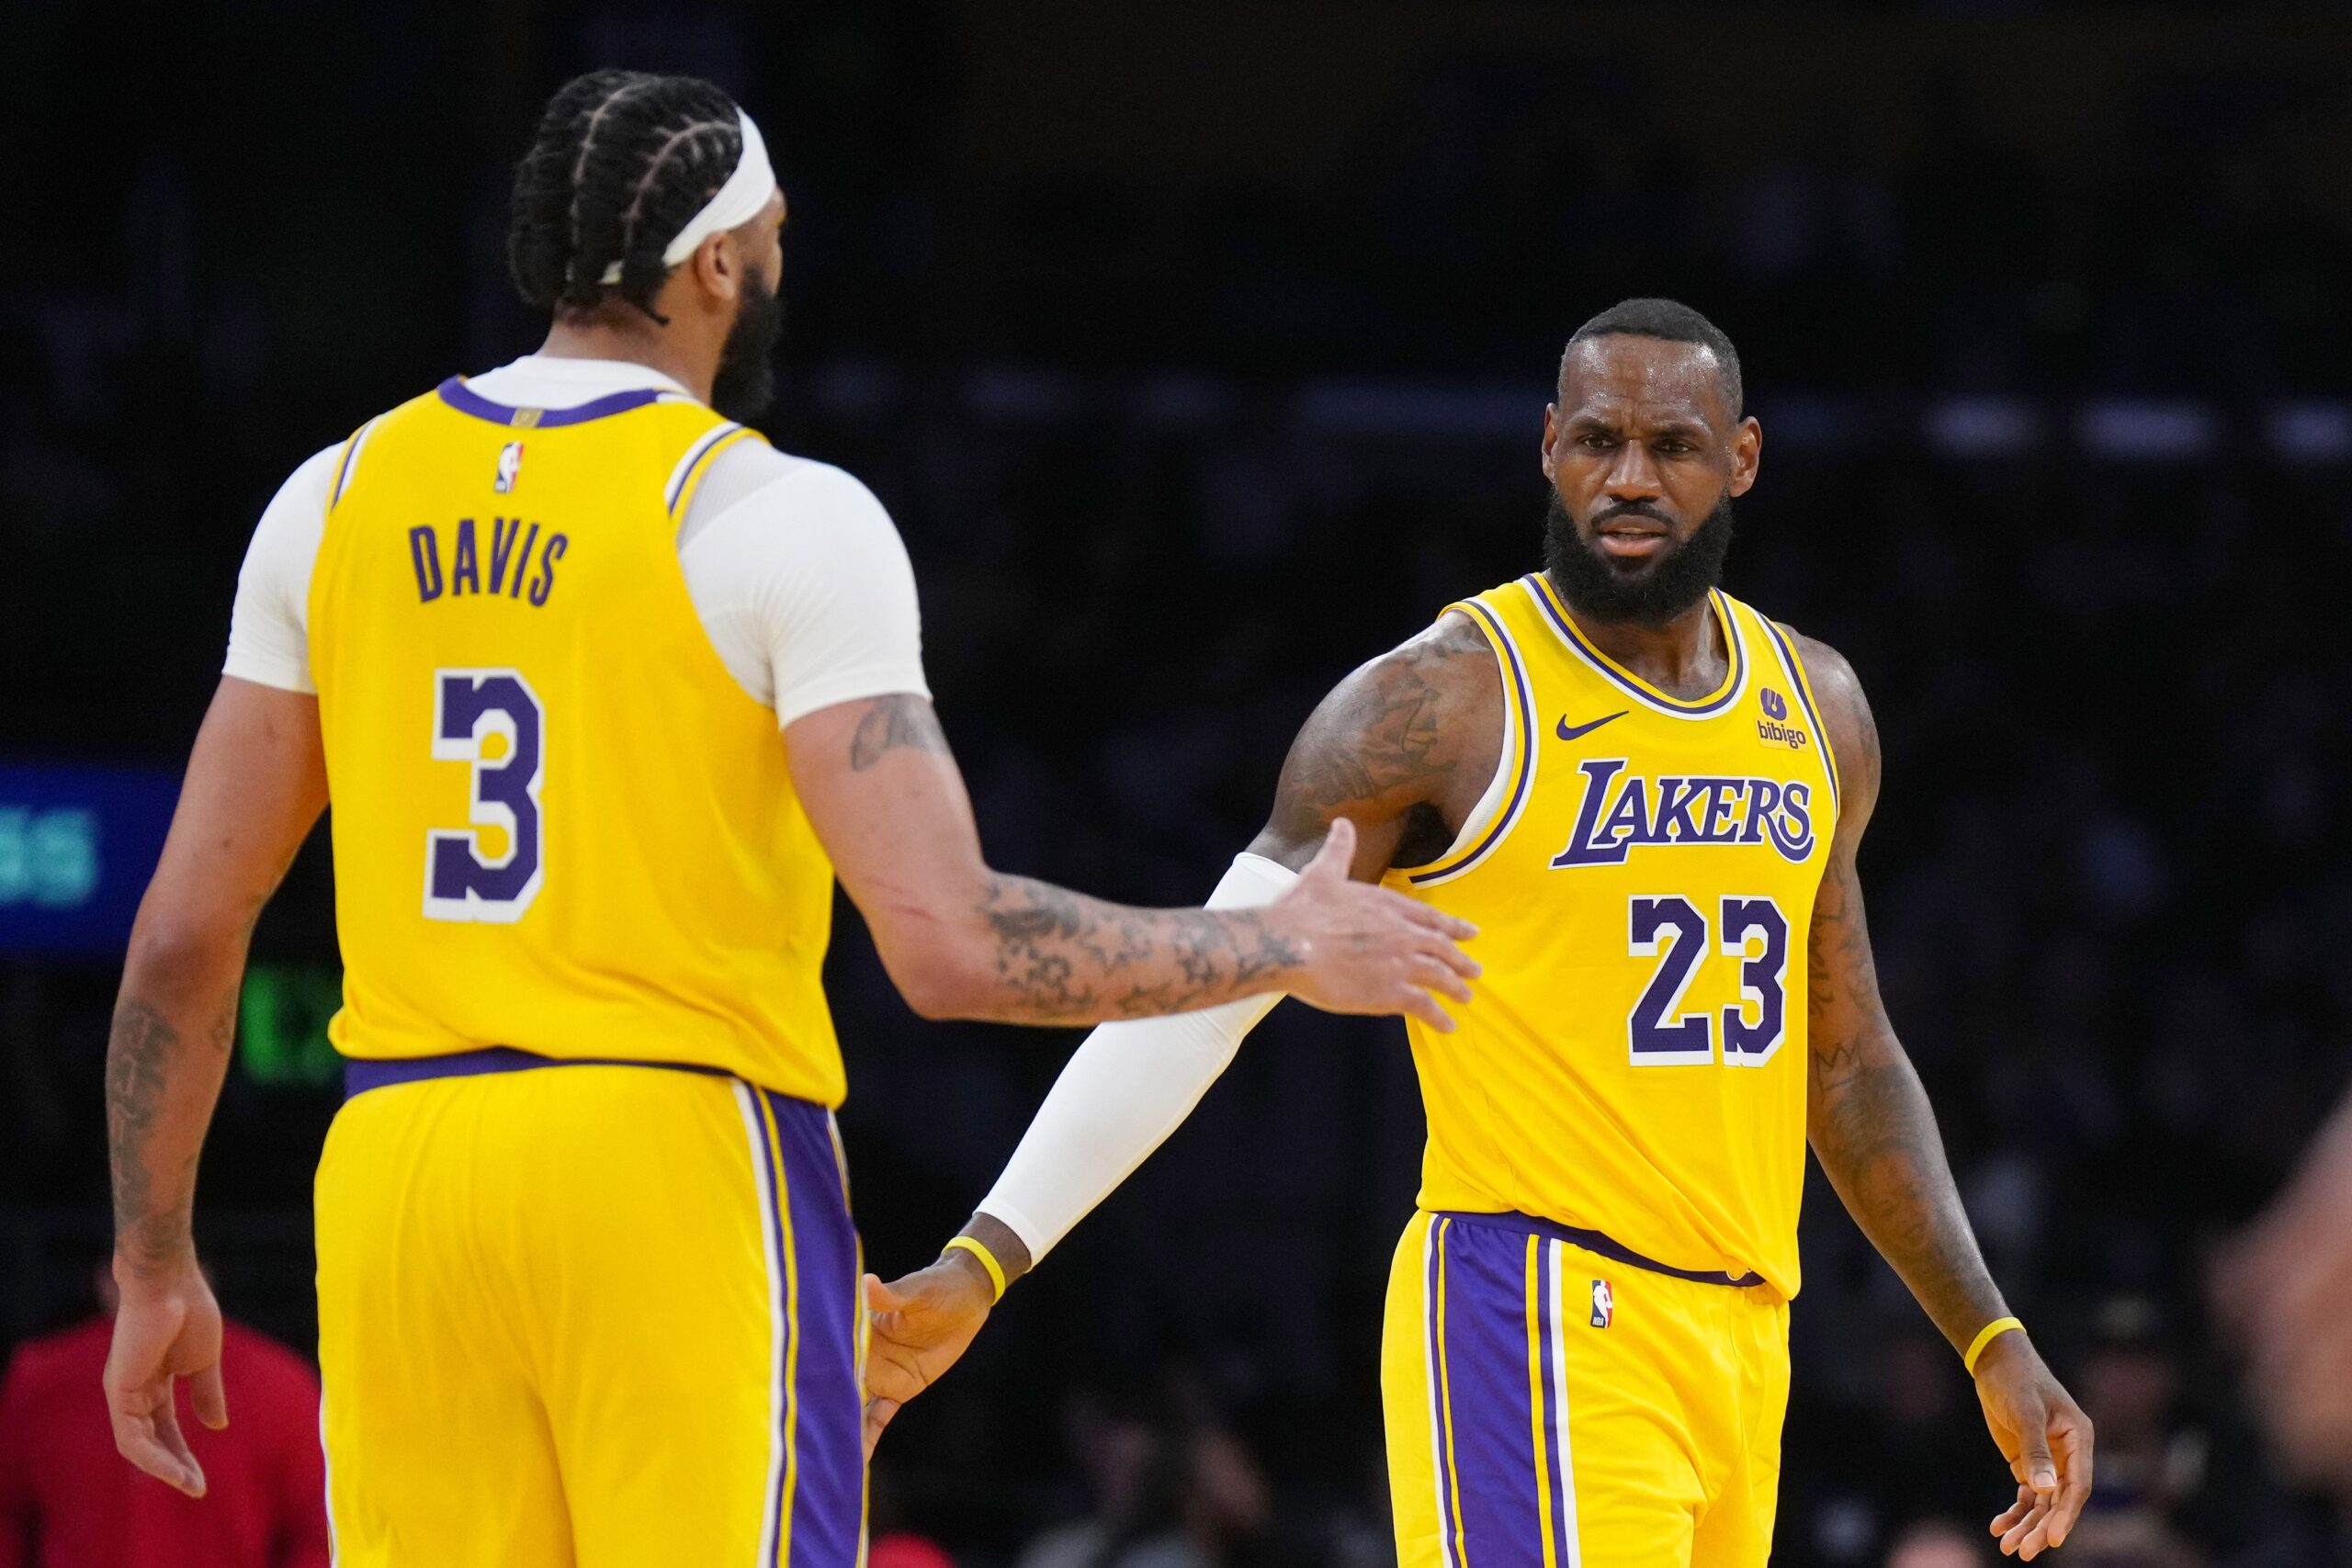 The Los Angeles Lakers' lack of success since their 2020 NBA championship has resulted in many questioning the tandem of LeBron James and Anthony Davis, and whether or not a trade would be in the franchise's best interest.